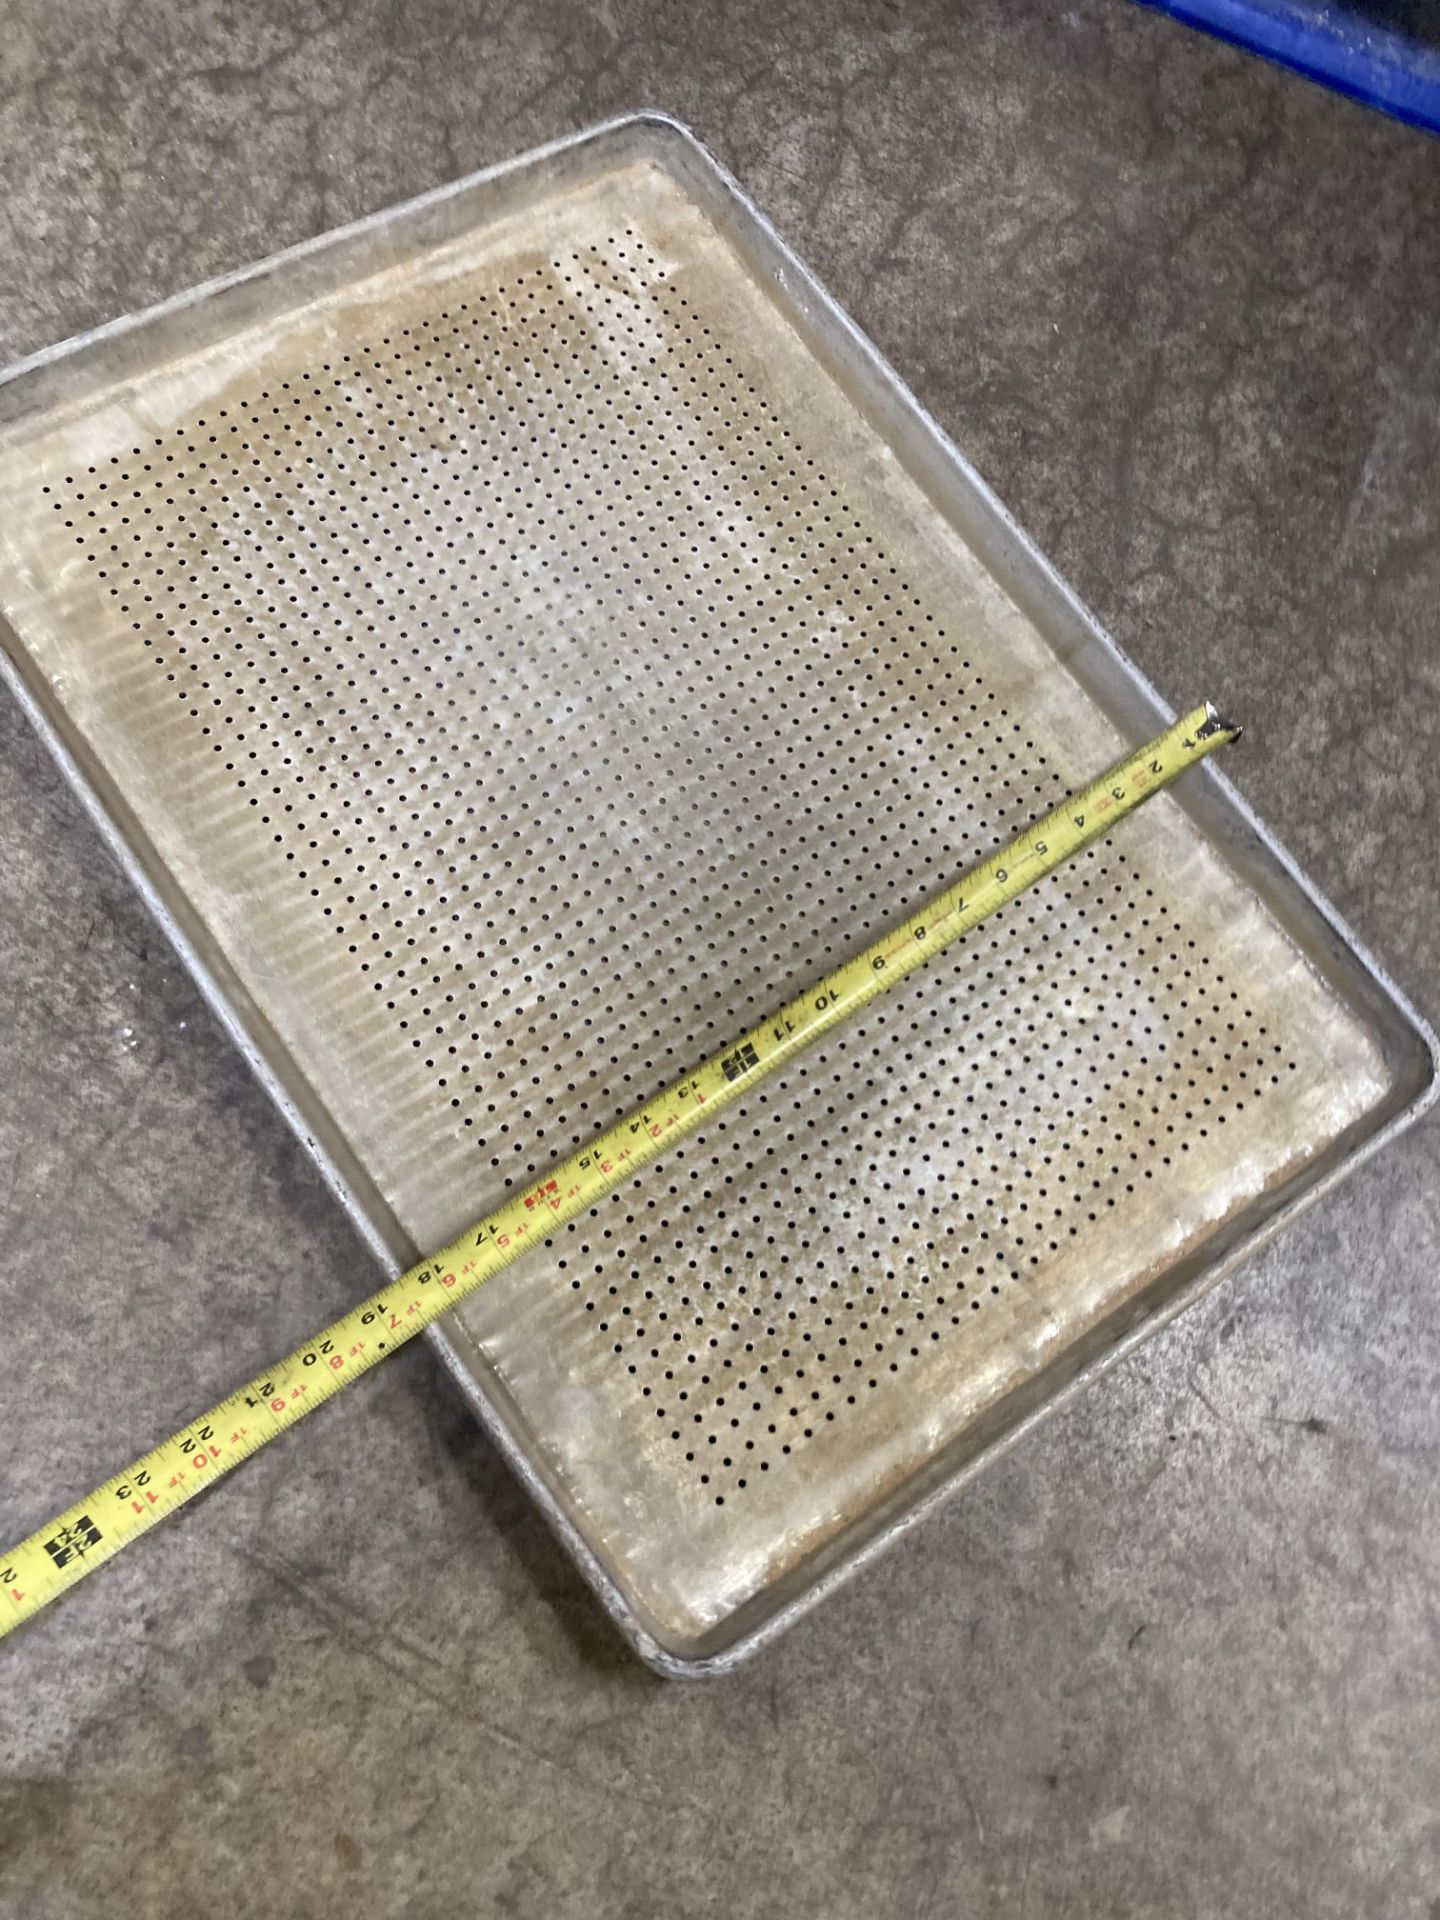 (LOT of approx 250) perforated hole sheet baking pan, 26 in x 18.5 in. ***RIGGING FEE of $75